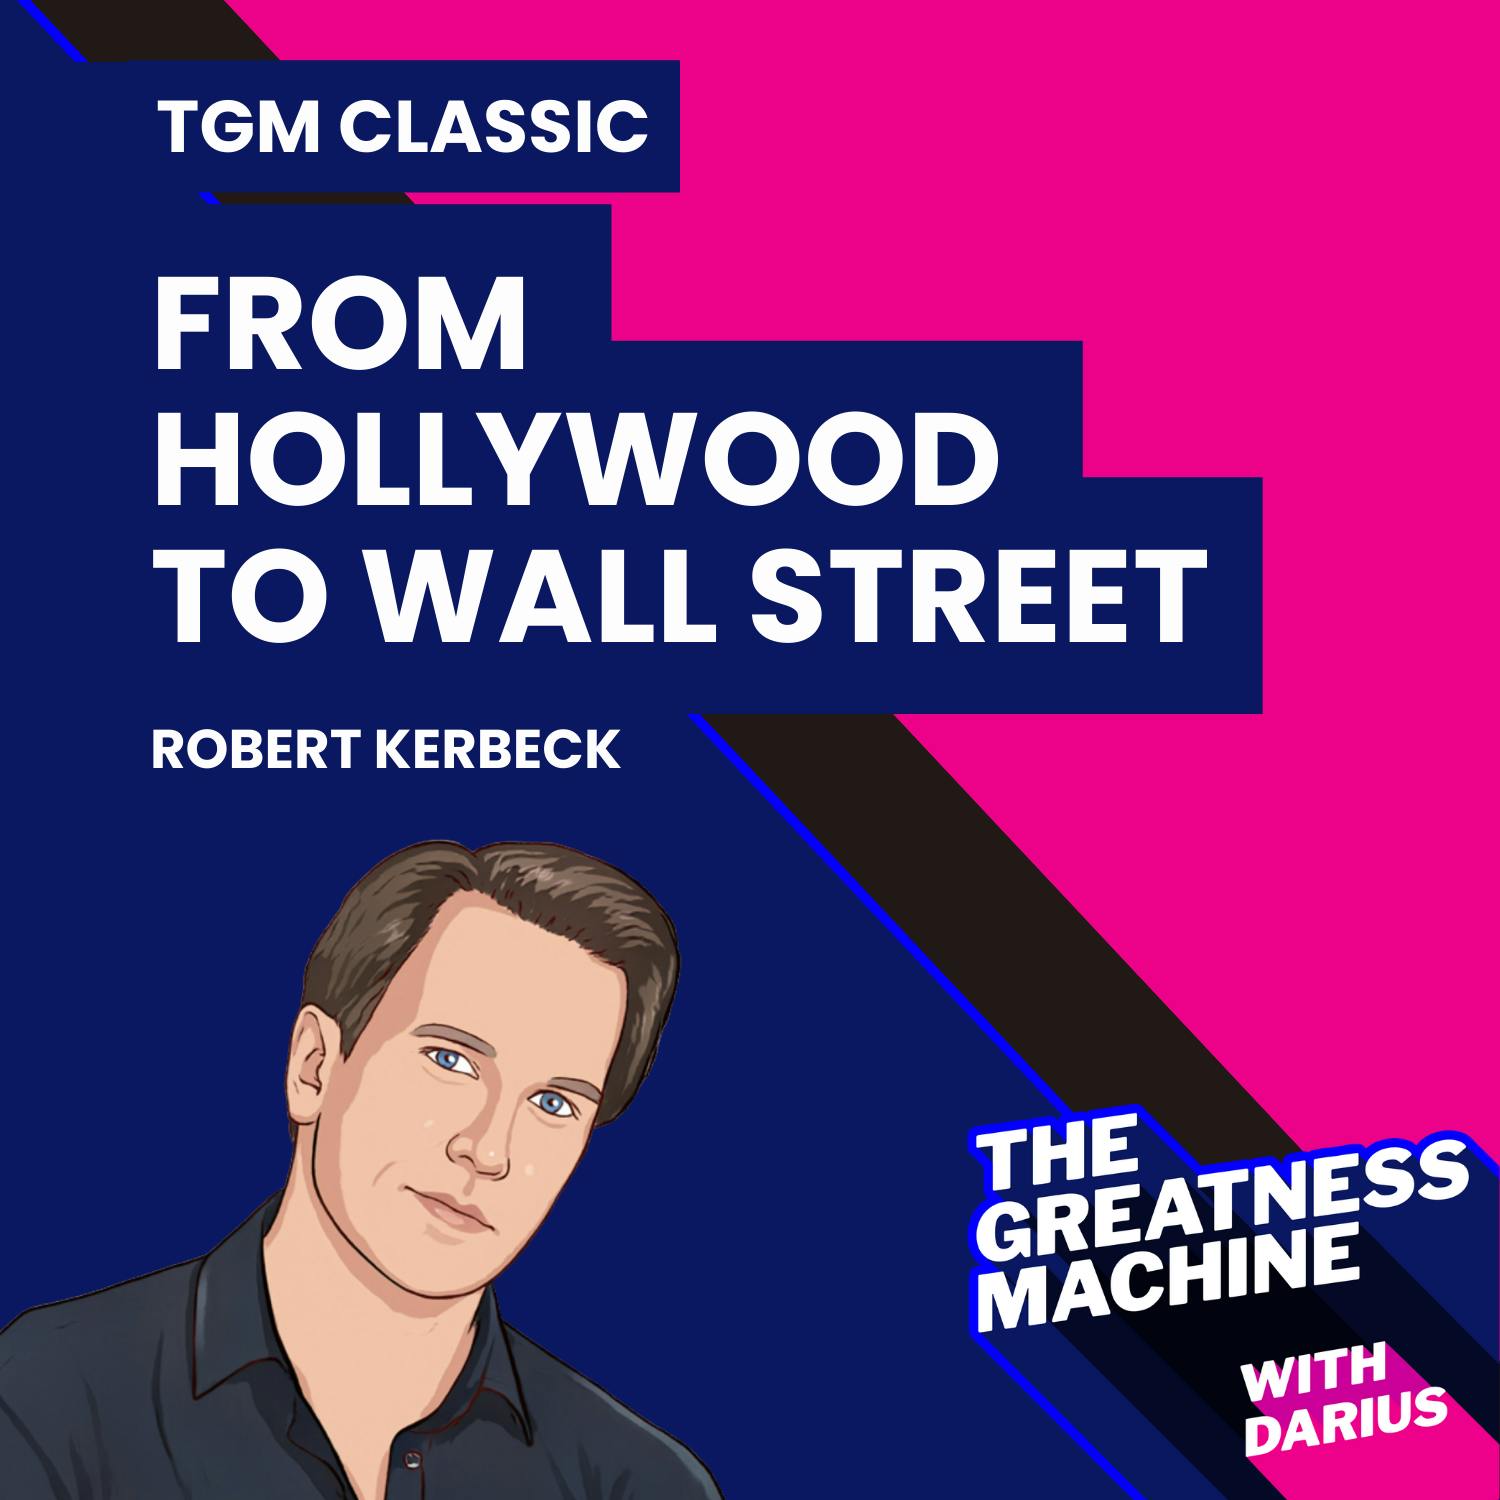 TGM Classic | Robert Kerbeck | From Hollywood to Wall Street: How Robert Kerbeck Got His Spying Job While Working As An Actor